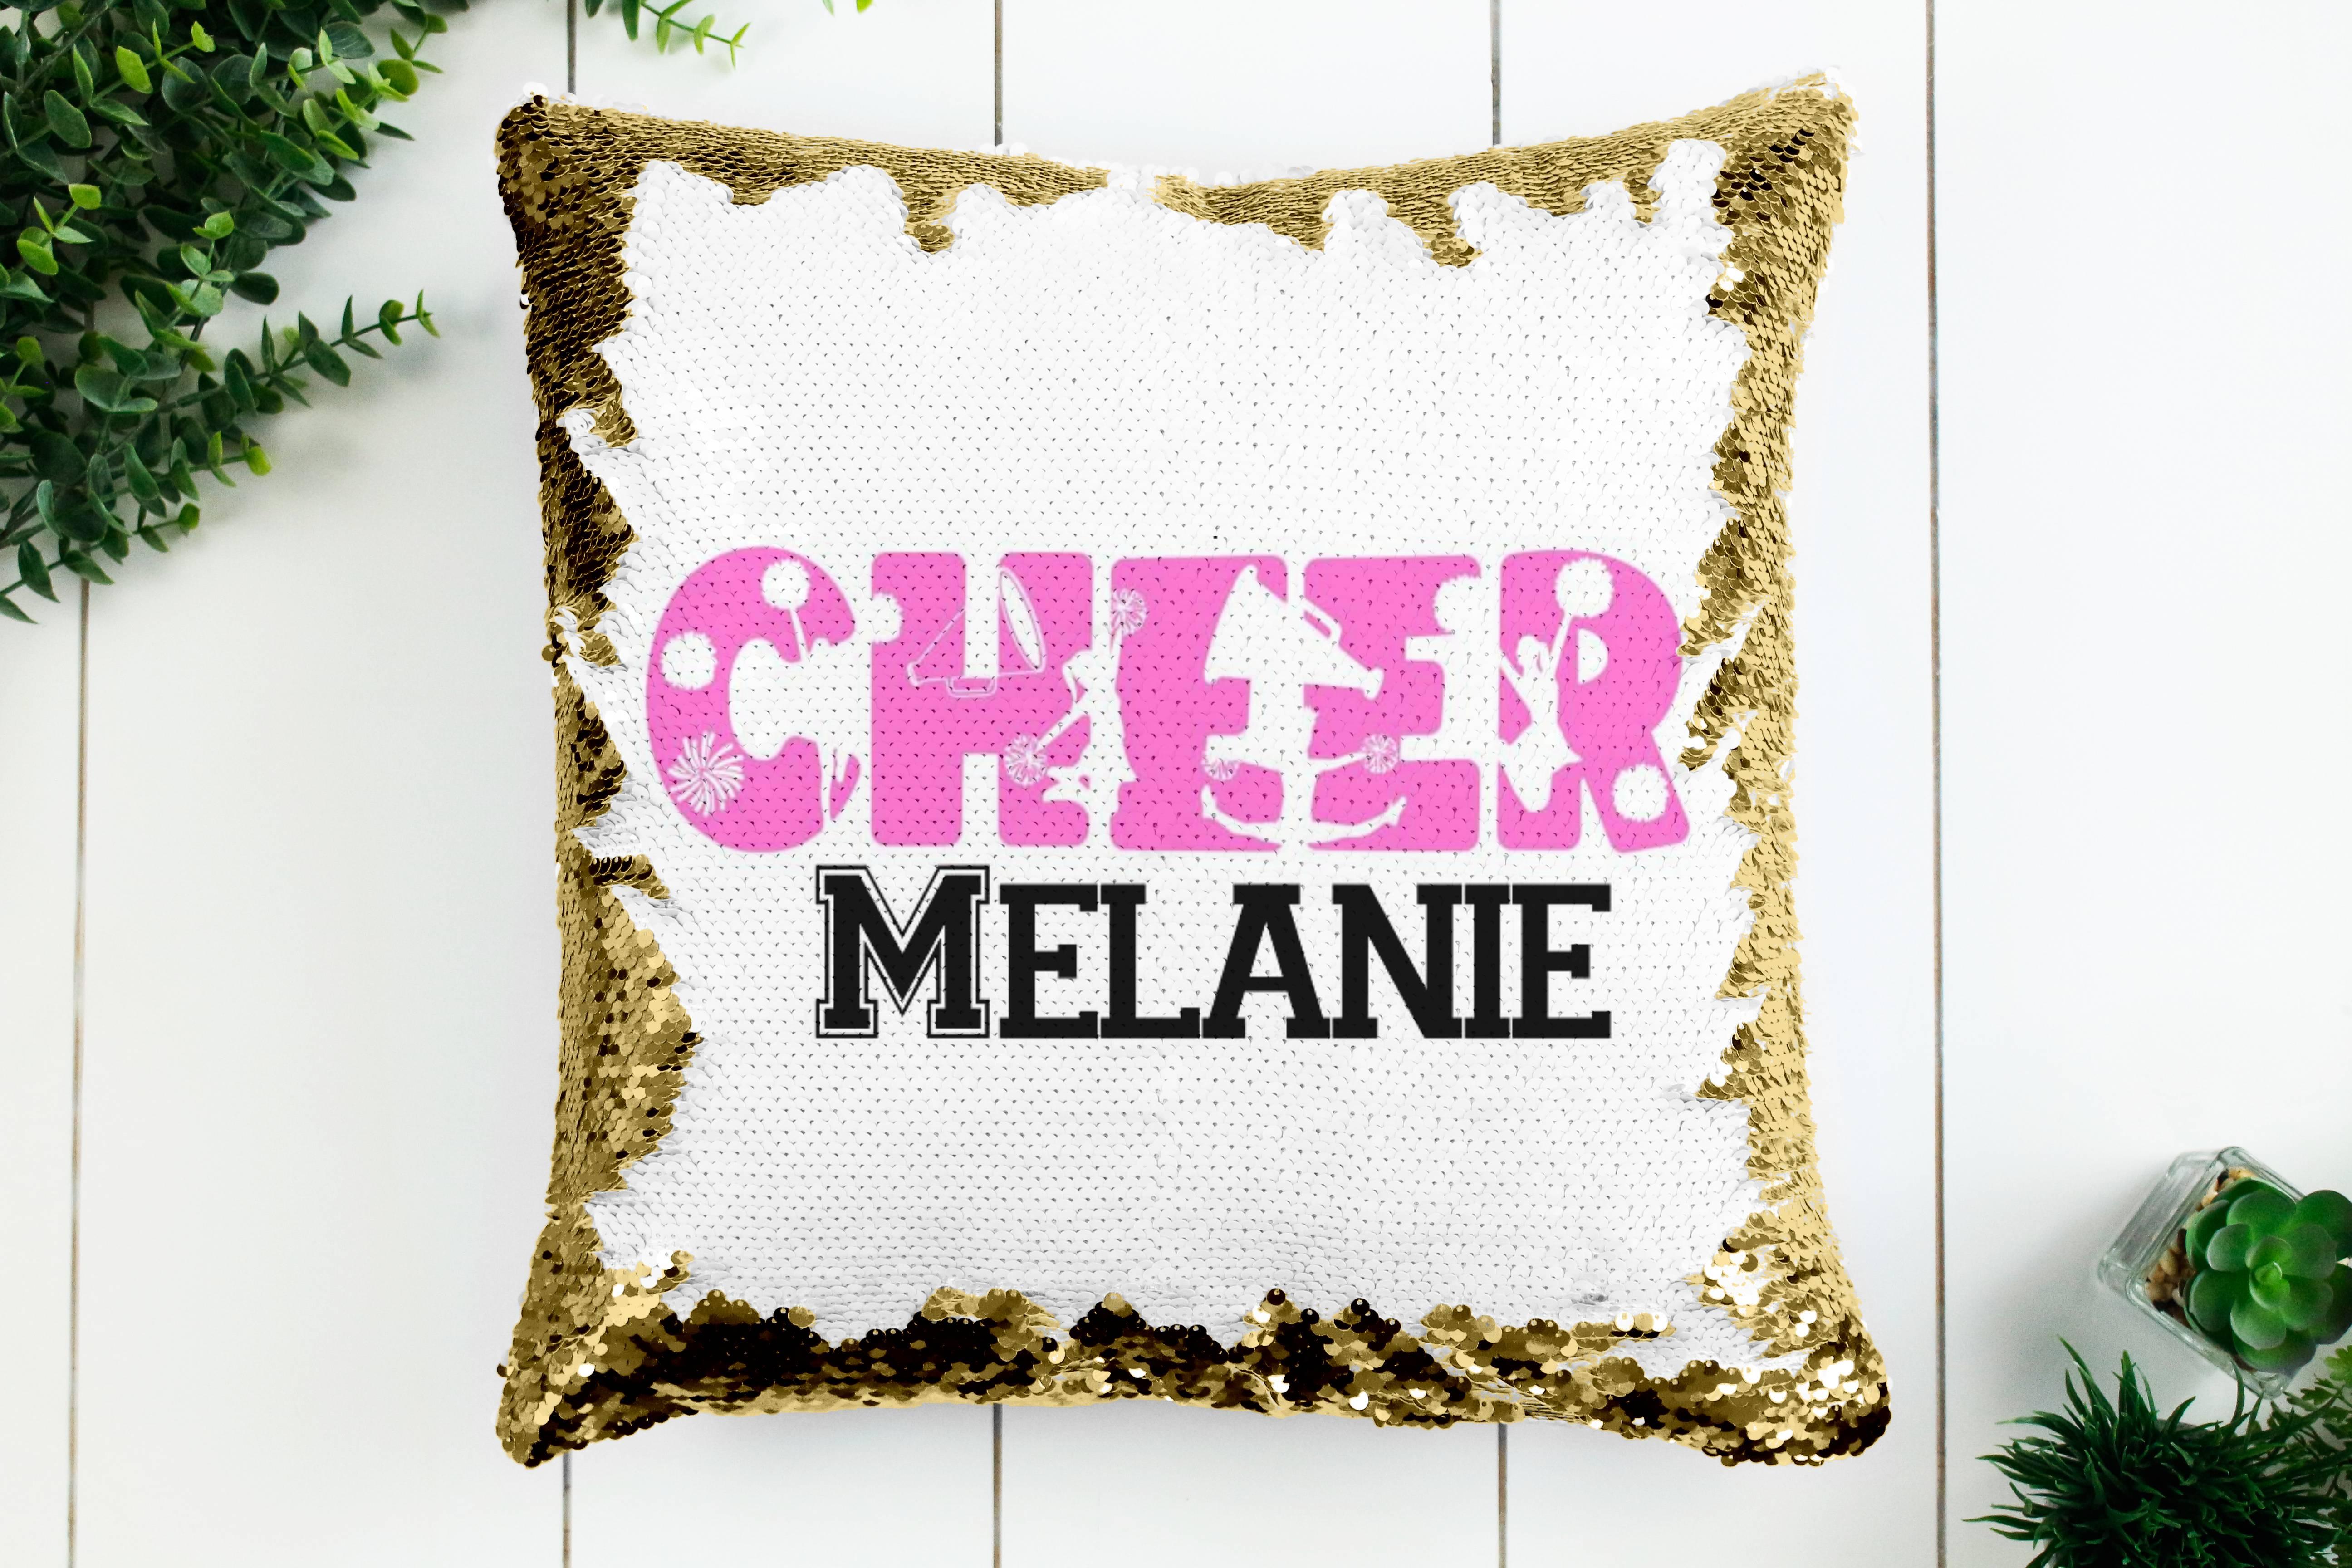 Personalized Cheer Gifts, Cheerleader Team Gift Ideas, Cheer Birthday Party Decor, Cute Gift for Toddler Girls 2, 3, 4, 5, 6, 7 year old, Birthday Gift for Girls, Cheerleader pillow case personalized Sequin Throw Pillowcase Custom Reversible Pillow Decorative Cushion Pillow Cover, Cheer lover gift | Gift for child with Sensory Needs and or Autism,  Birthday Theme Party Supplies